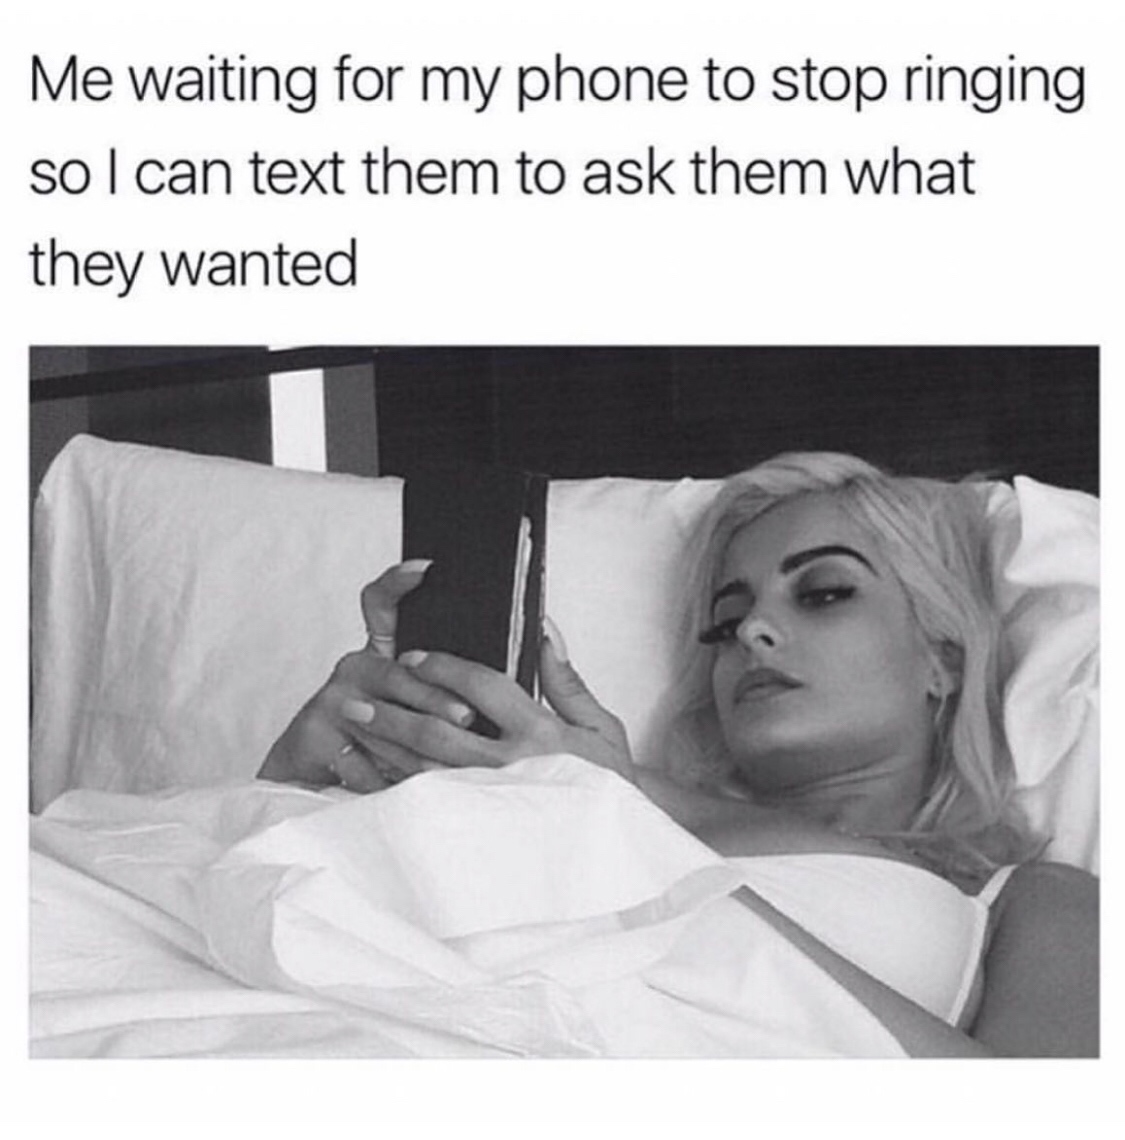 phone ringing meme - Me waiting for my phone to stop ringing so I can text them to ask them what they wanted